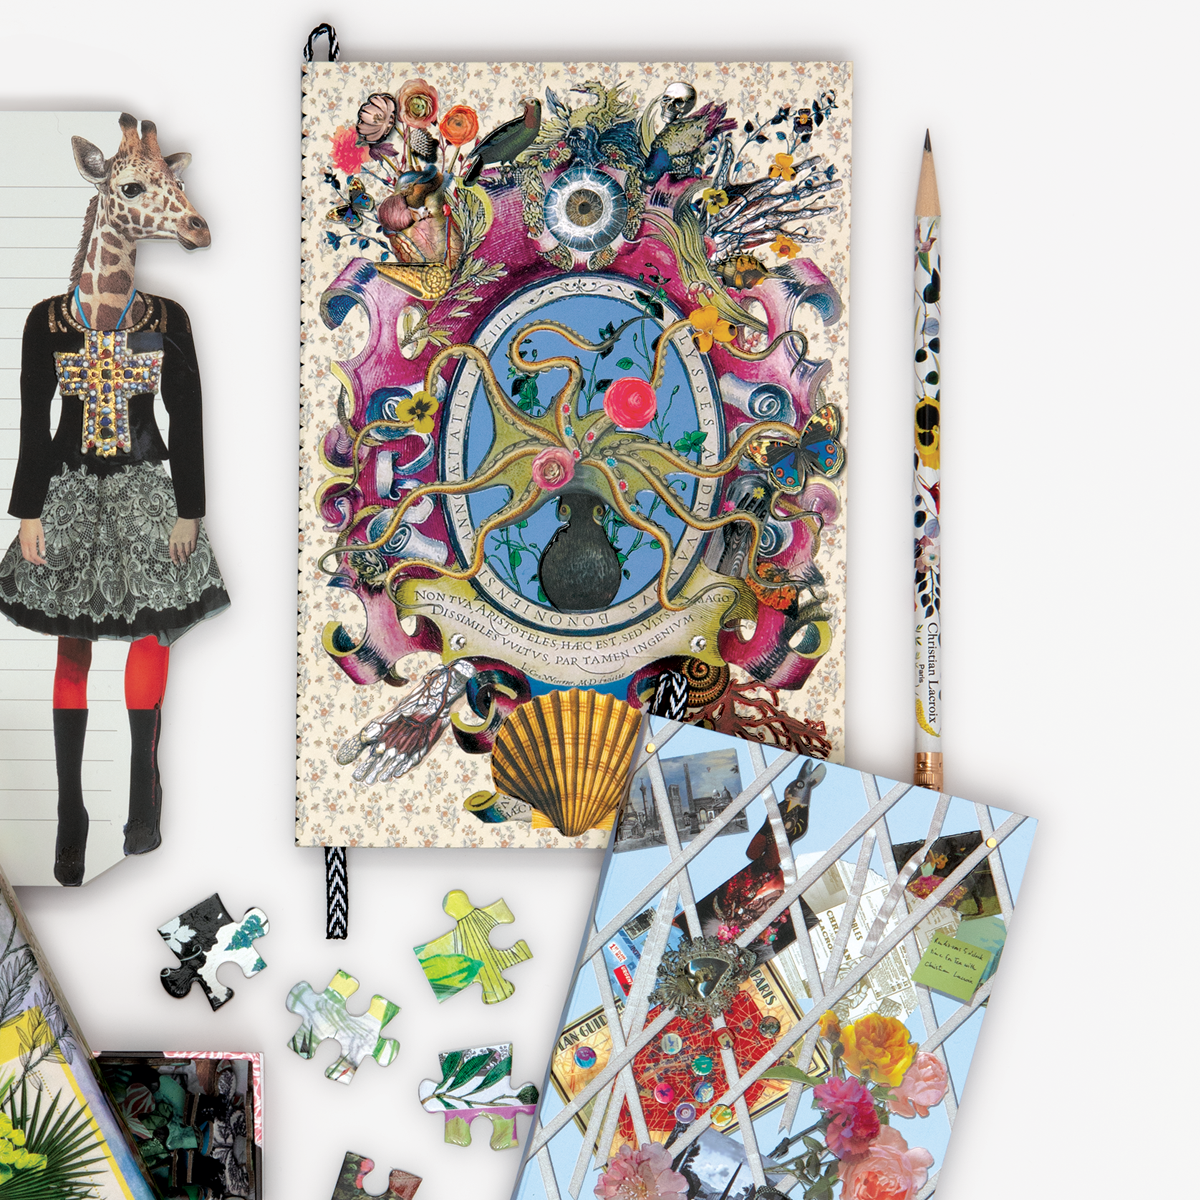 Christian Lacroix Heritage Collection Curiosity A5 Notebook Journals and Notebooks Christian Lacroix Collection 